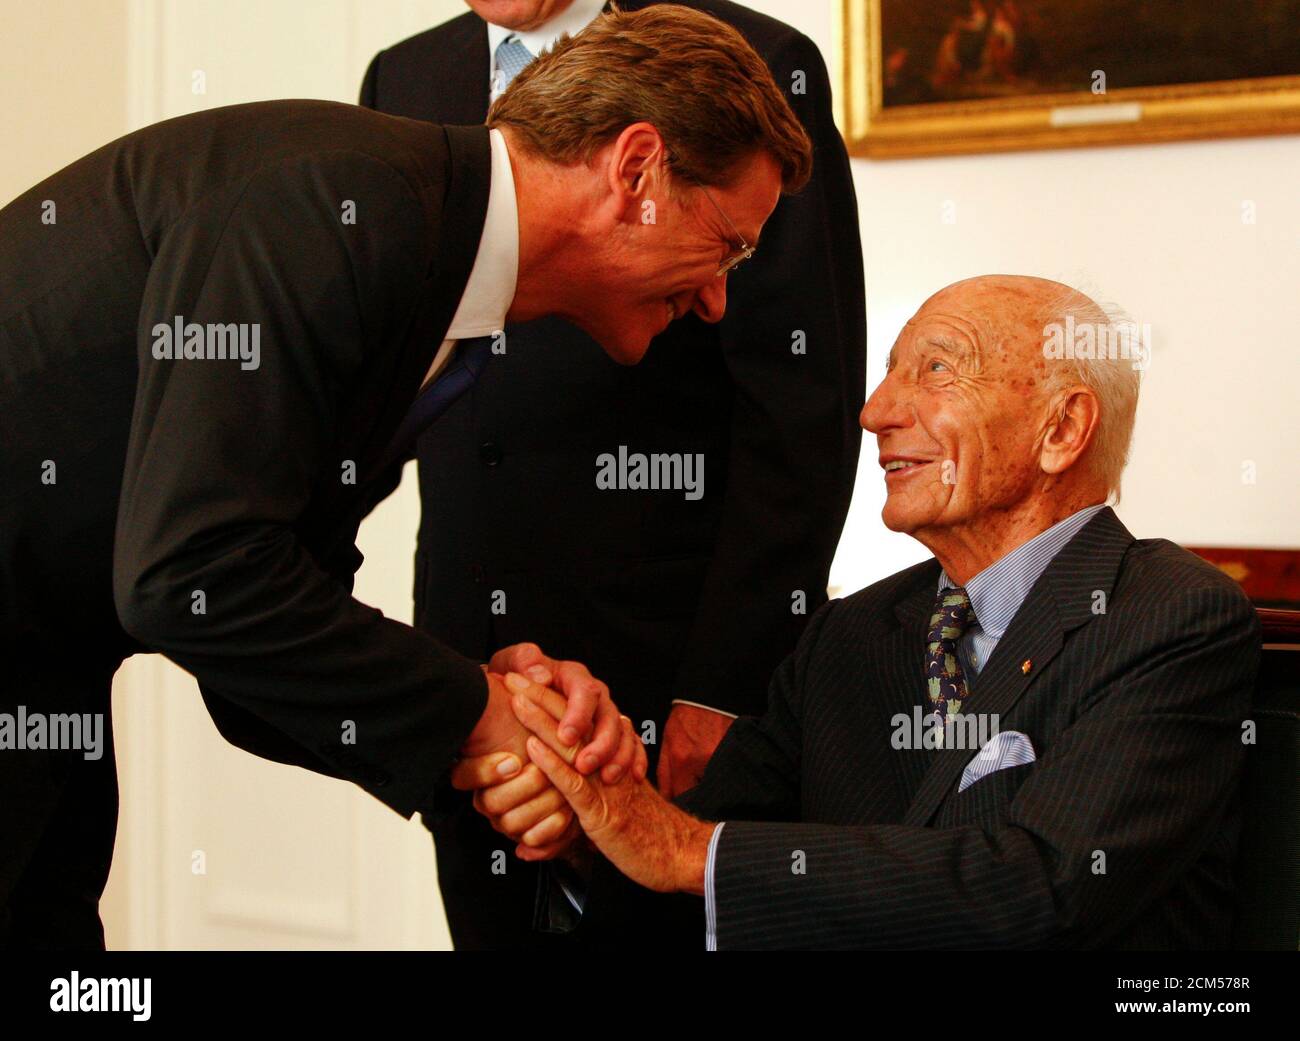 The leader of Germany's FDP liberal party Guido Westerwelle (L) congratulates former German President Walter Scheel on his 90th birthday in the Bellevue Palace in Berlin July 15, 2009. Germany's current President Horst Koehler is pictured in the background.    REUTERS/Thomas Peter   (GERMANY) Stock Photo